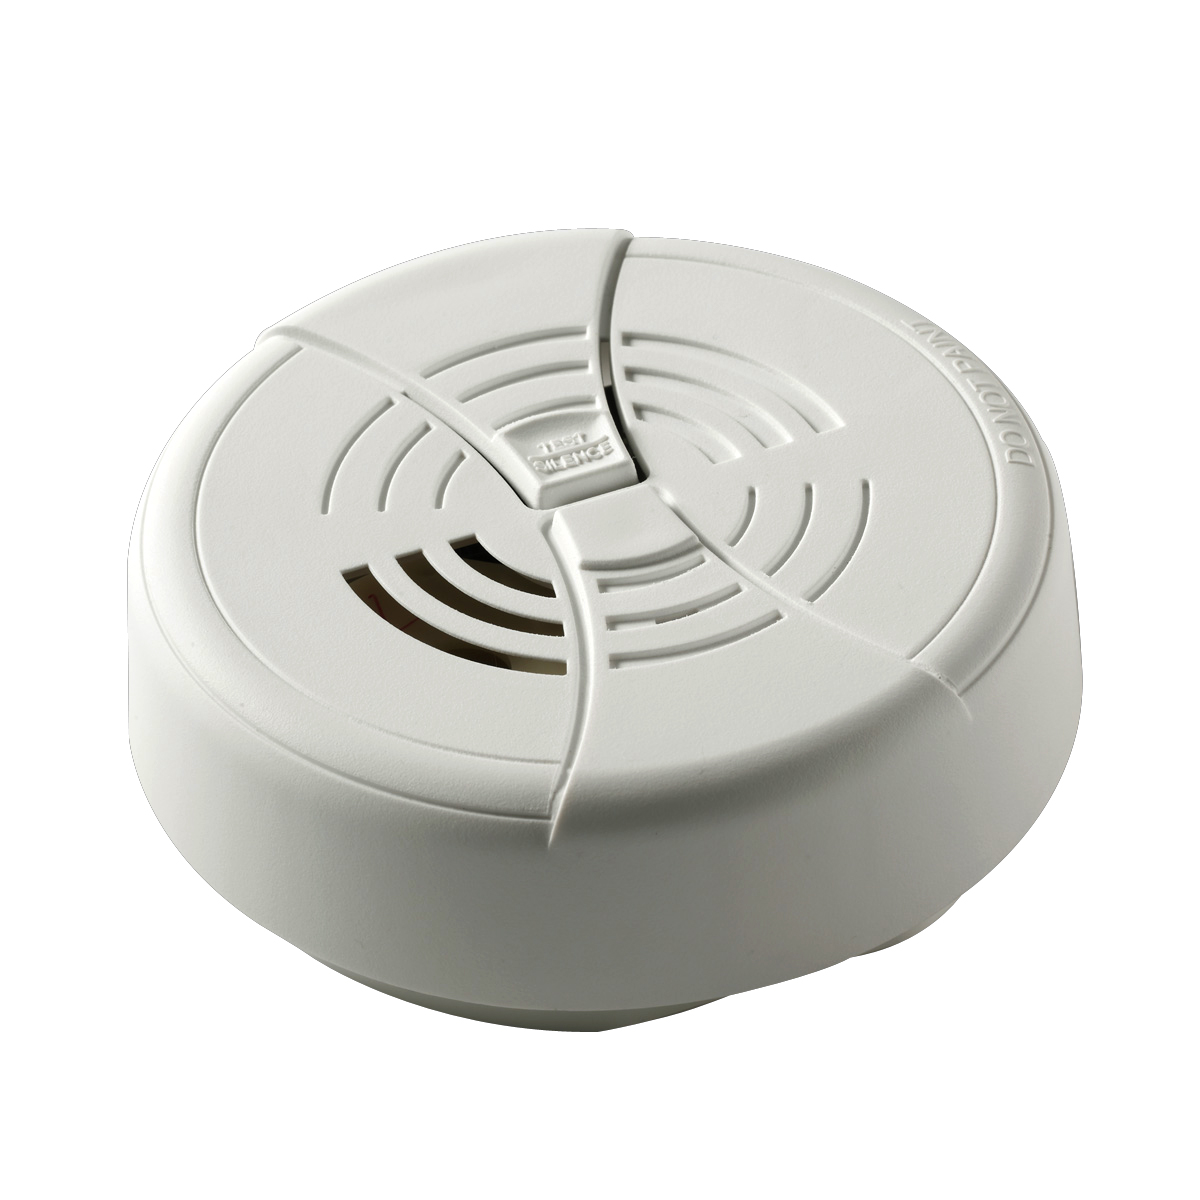 Lithium battery operated smoke alarm perfect for use in existing multi-family applications.